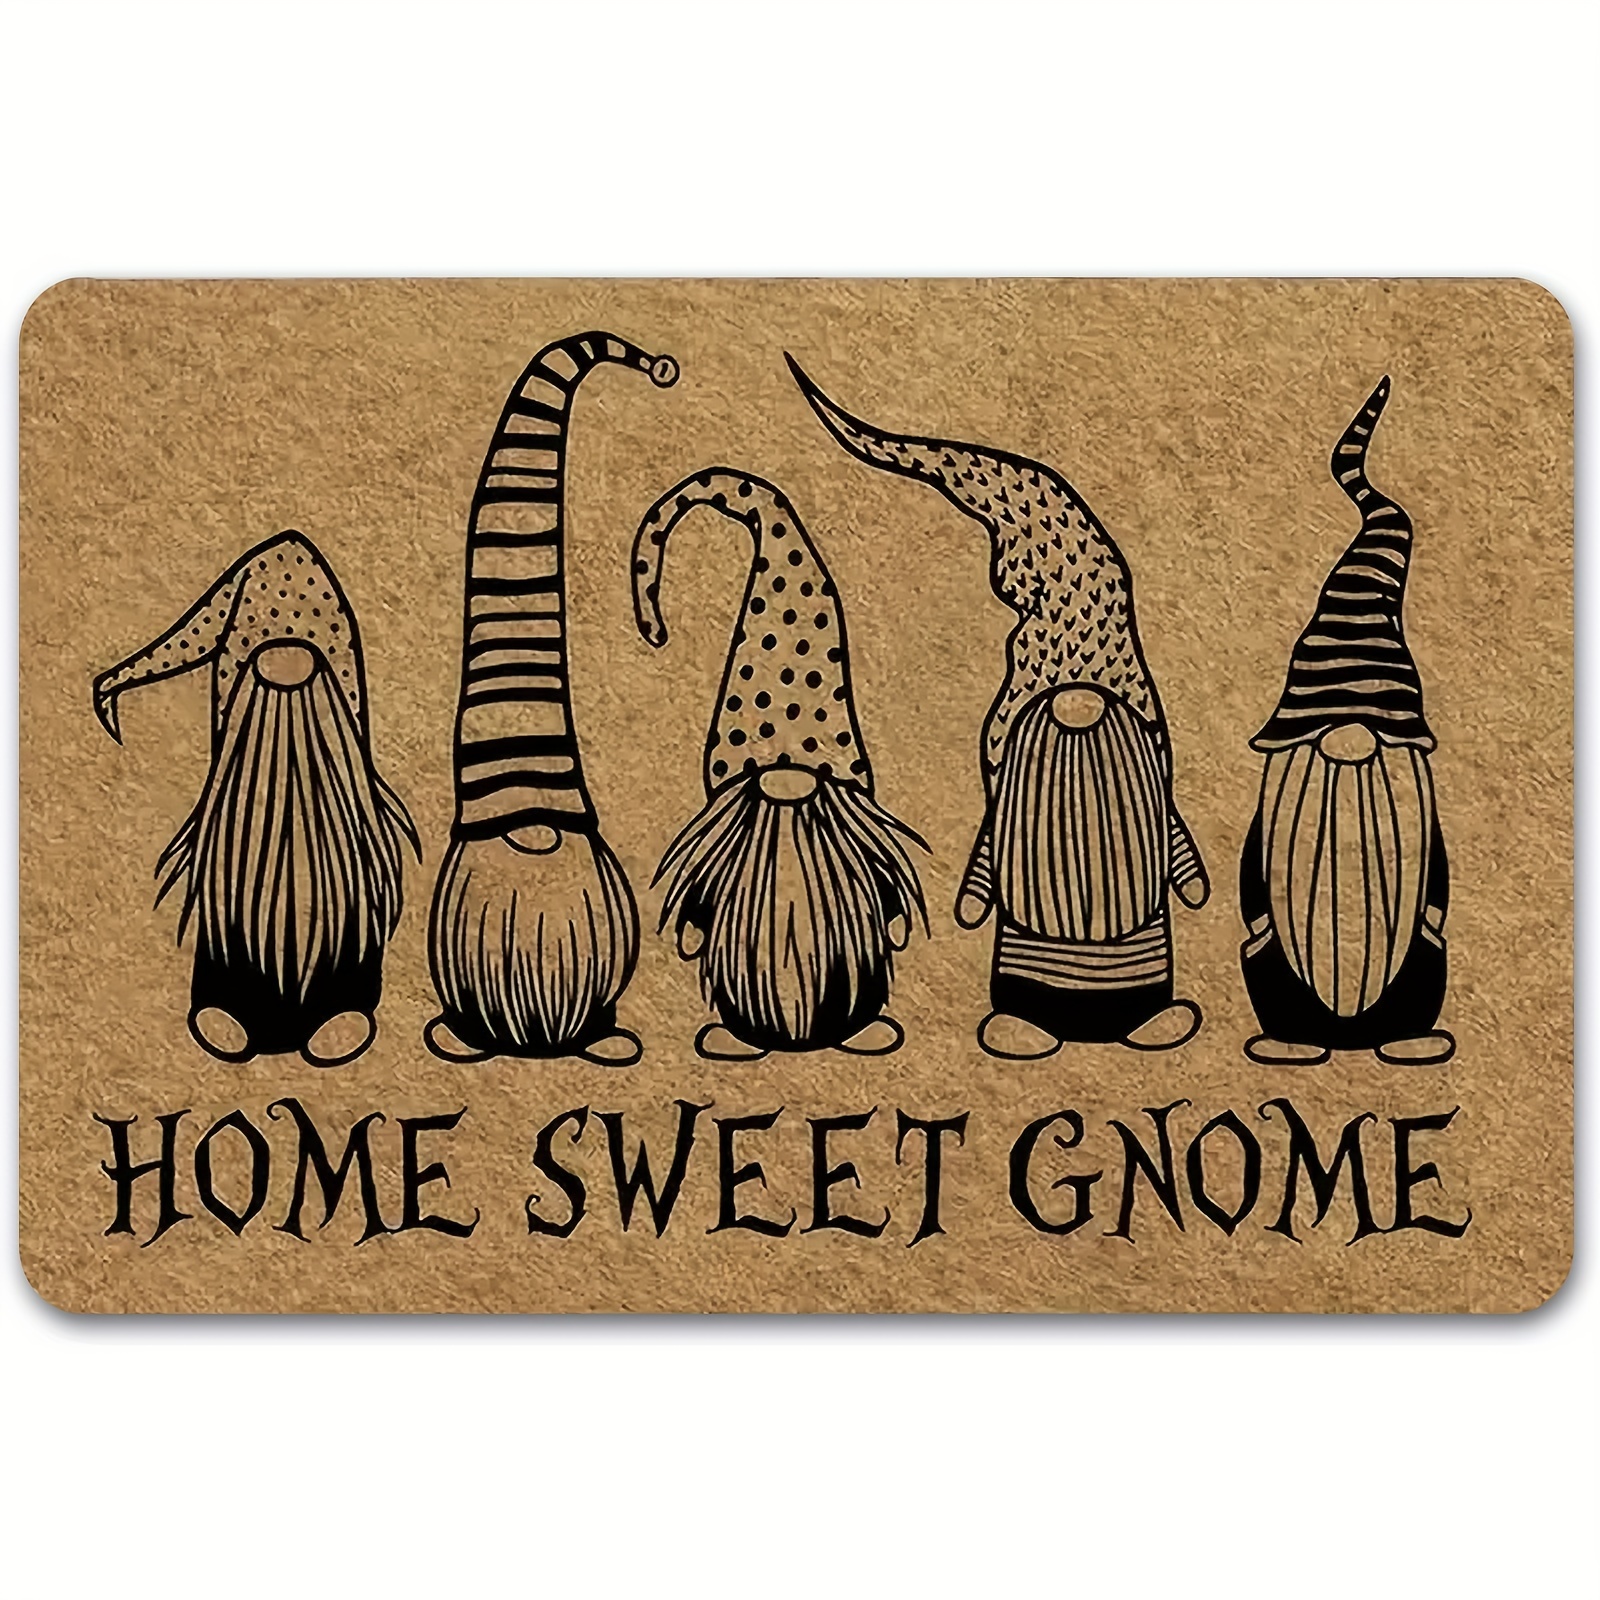 

1pc Sweet Gnome Pattern Doormat, Anti-fatigue Throw Carpet, Hand Washable Rug, For Outdoor Entrance Indoors Farmhouse Kitchen Home Room Supplies Spring Decor Gift Valentine's Day